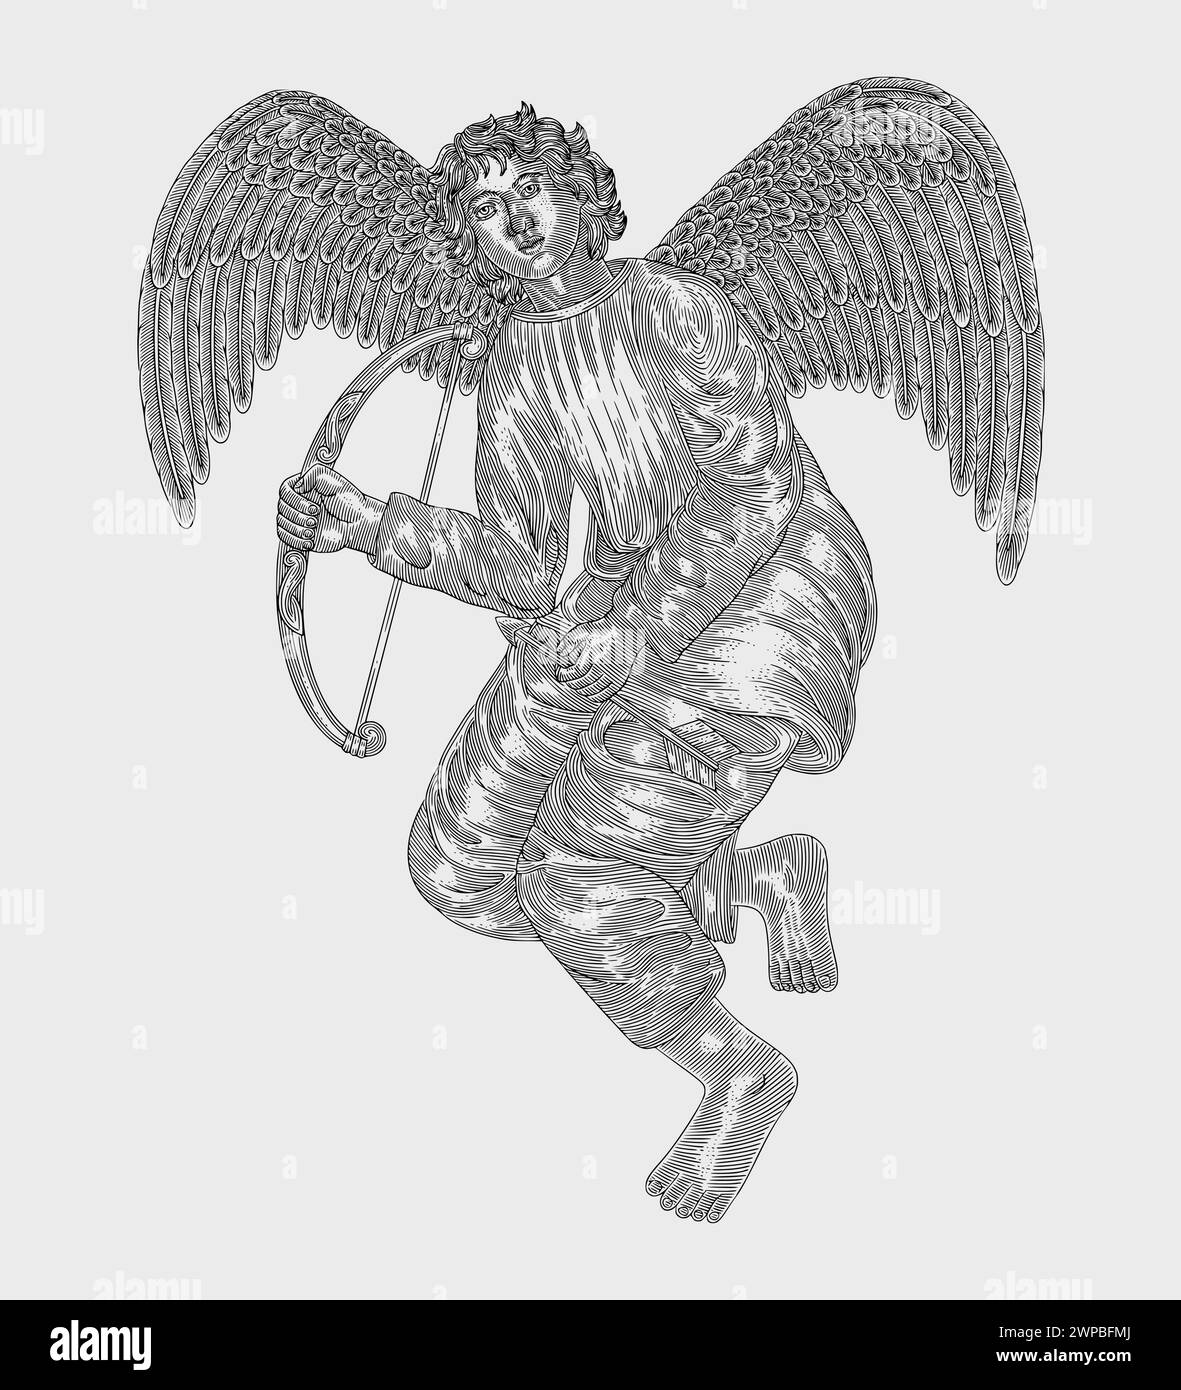 angel with wings holding bow and arrow vintage engraving drawing style illustration Stock Vector